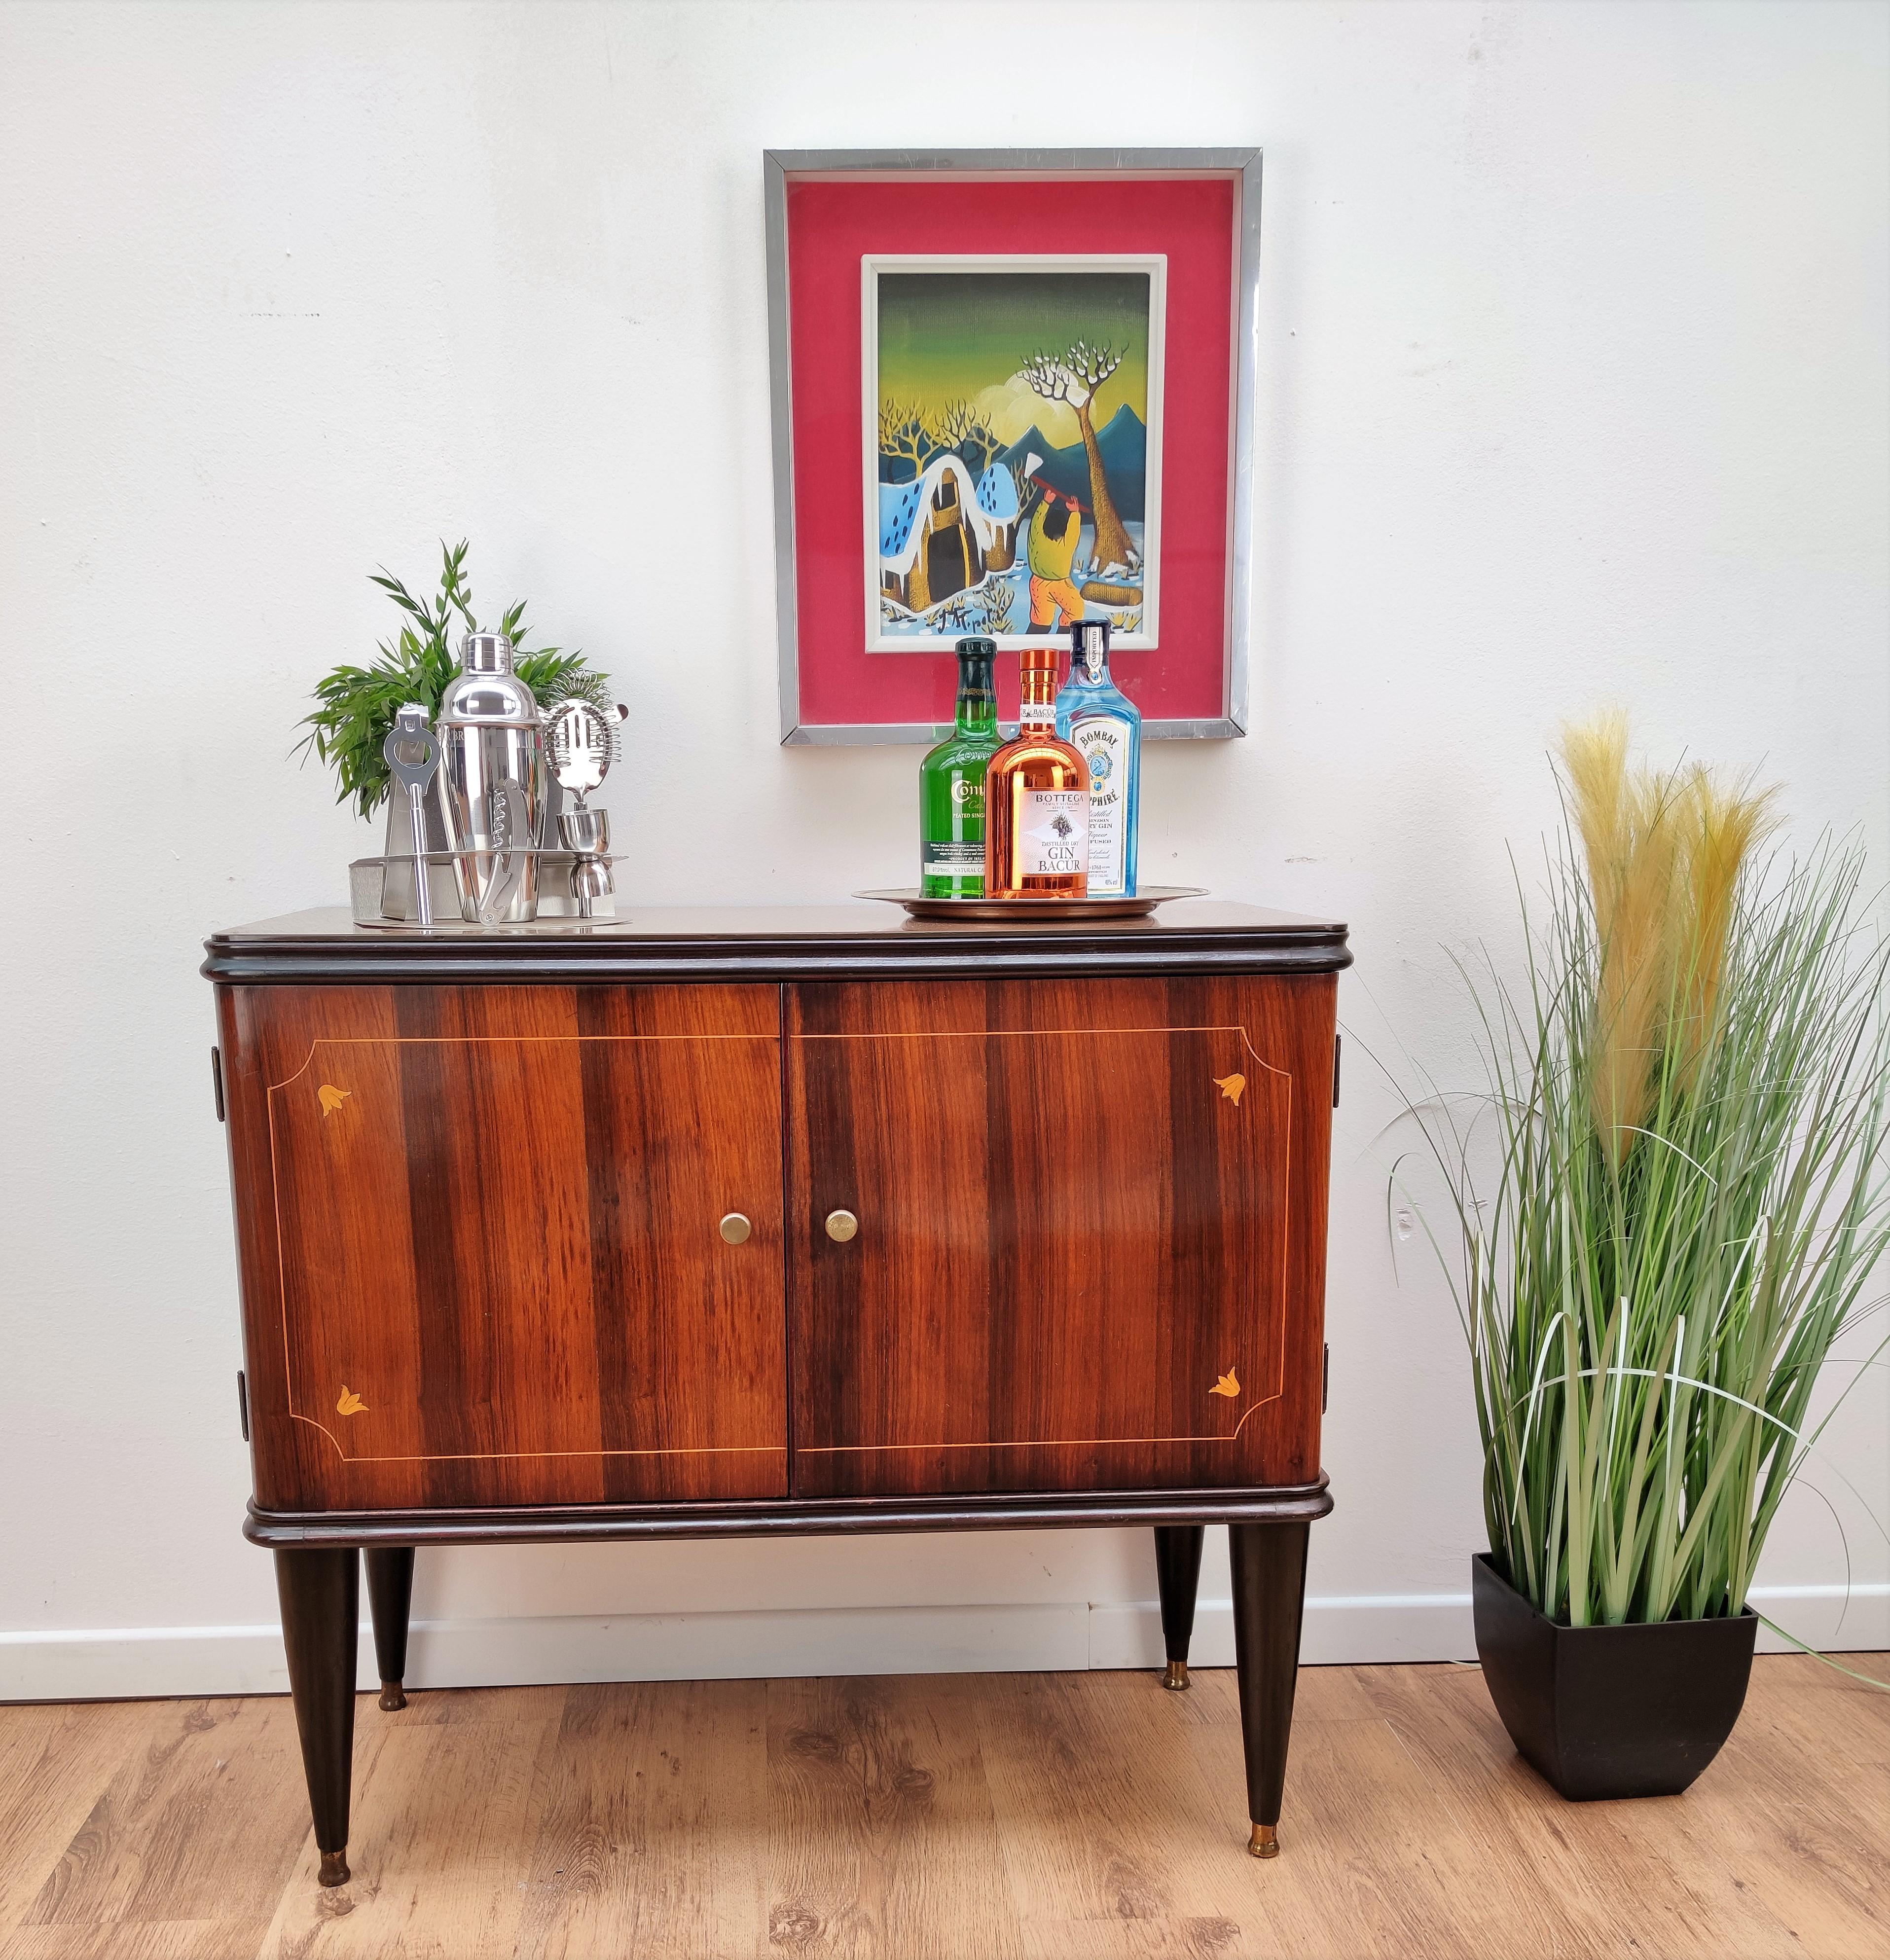 Very elegant Italian Art Deco Mid-Century Modern dry bar cabinet, in beautiful veneer walnut briar burl wood, two doors with inlay gilt frame decor, amazing interior part in mirrors mosaic and shelves with antique brass handles and glass top. The